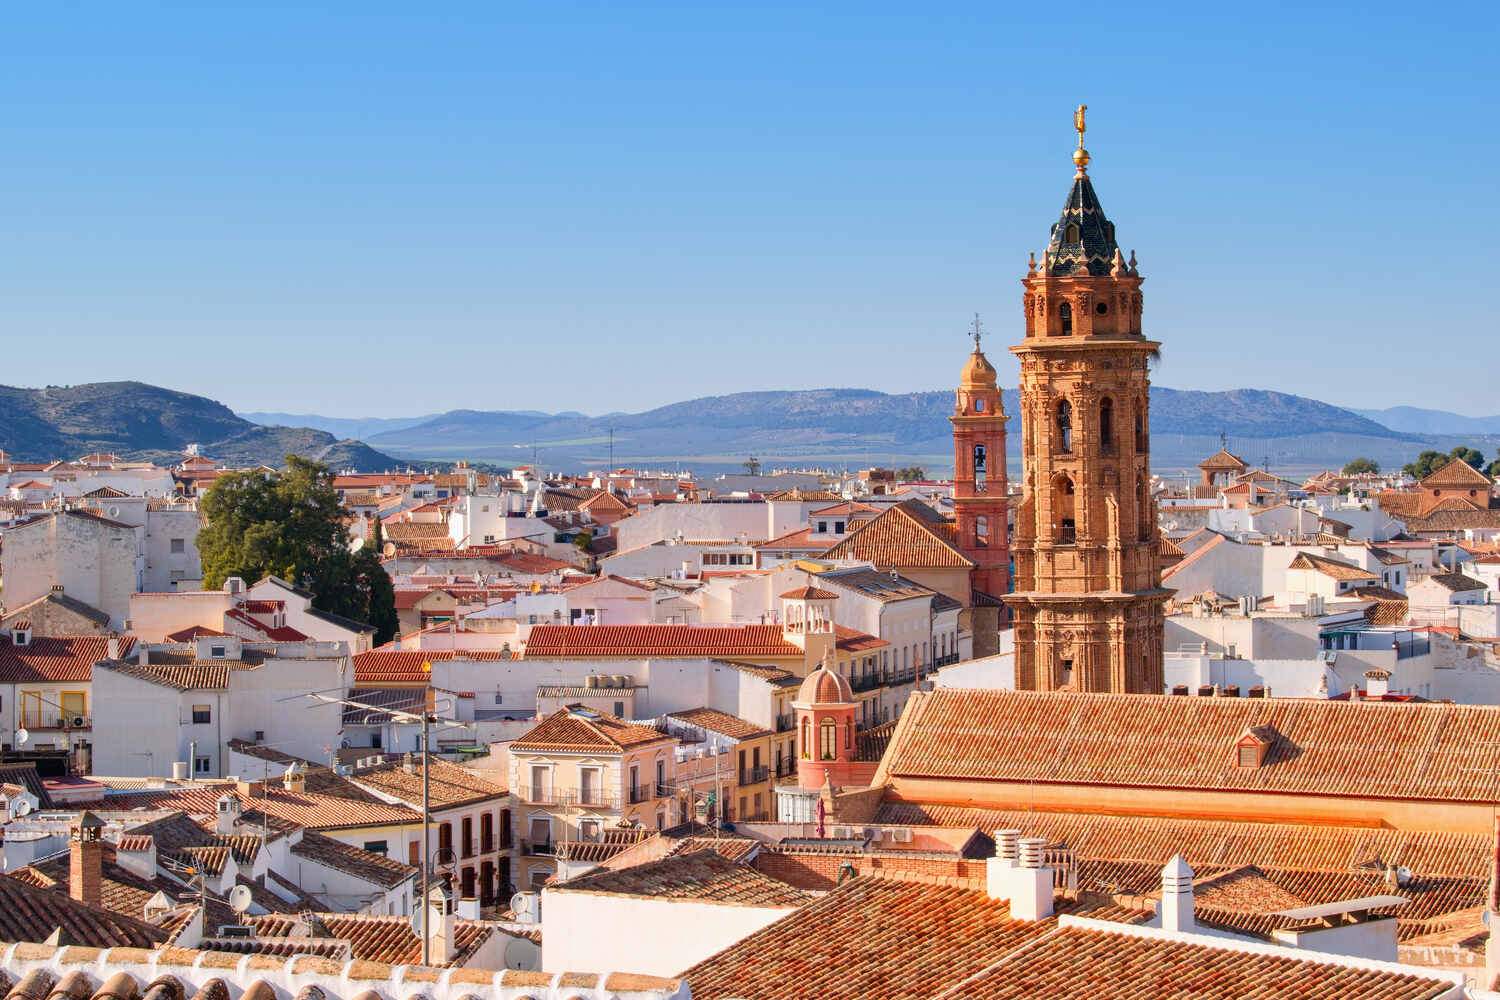 Overlooking-Antequera-cityscape-with-church-tower